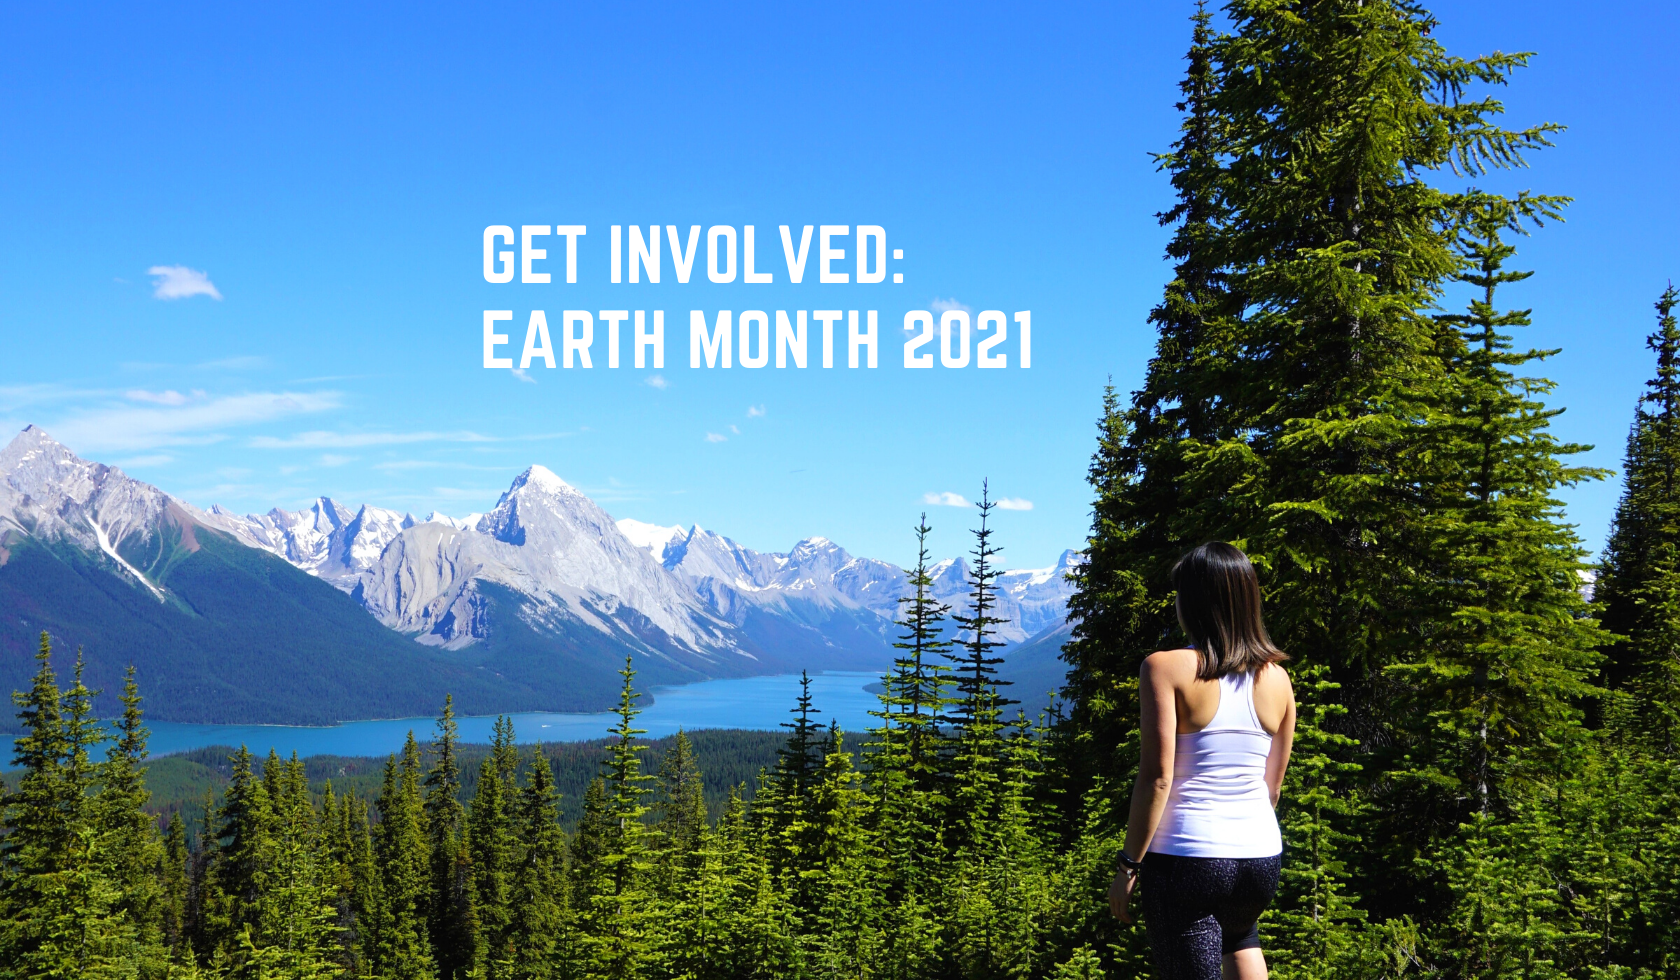 6 Easy Ways To Participate in Earth Month 2021